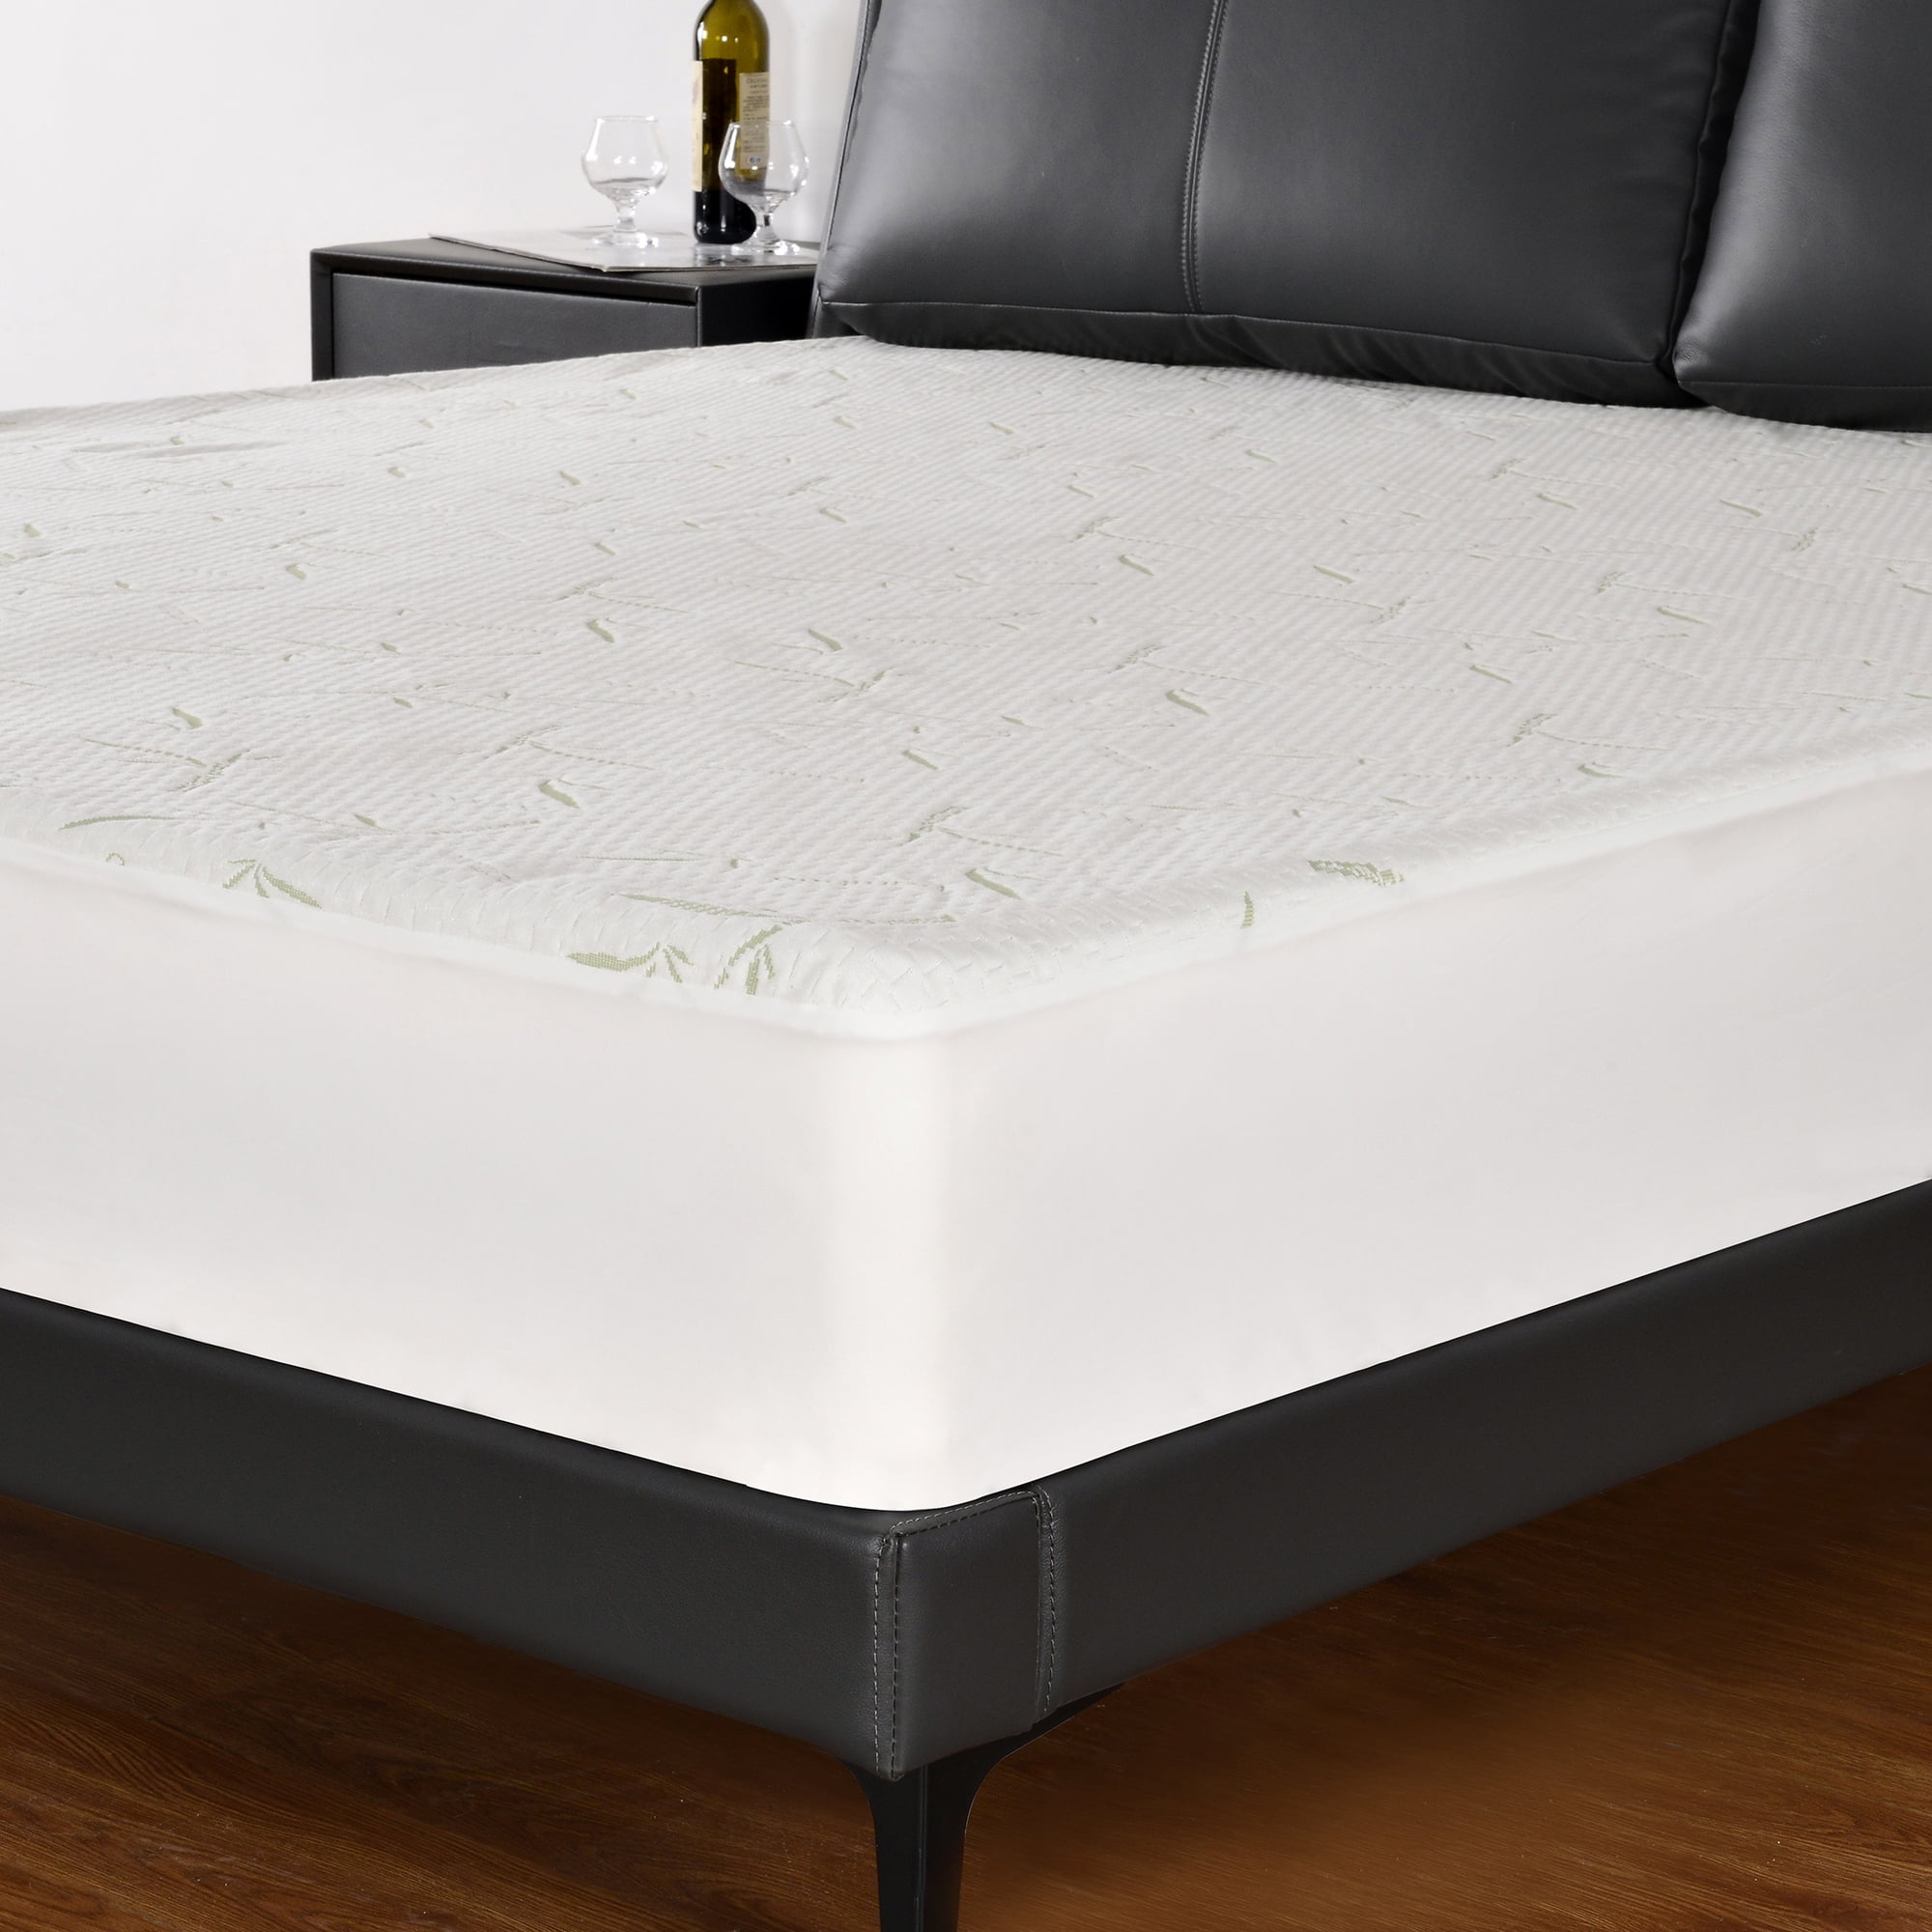 Details about   Bamboo Waterproof Mattress Protector Cover 5Size Quilted Fitted Mattress Pad HOT 